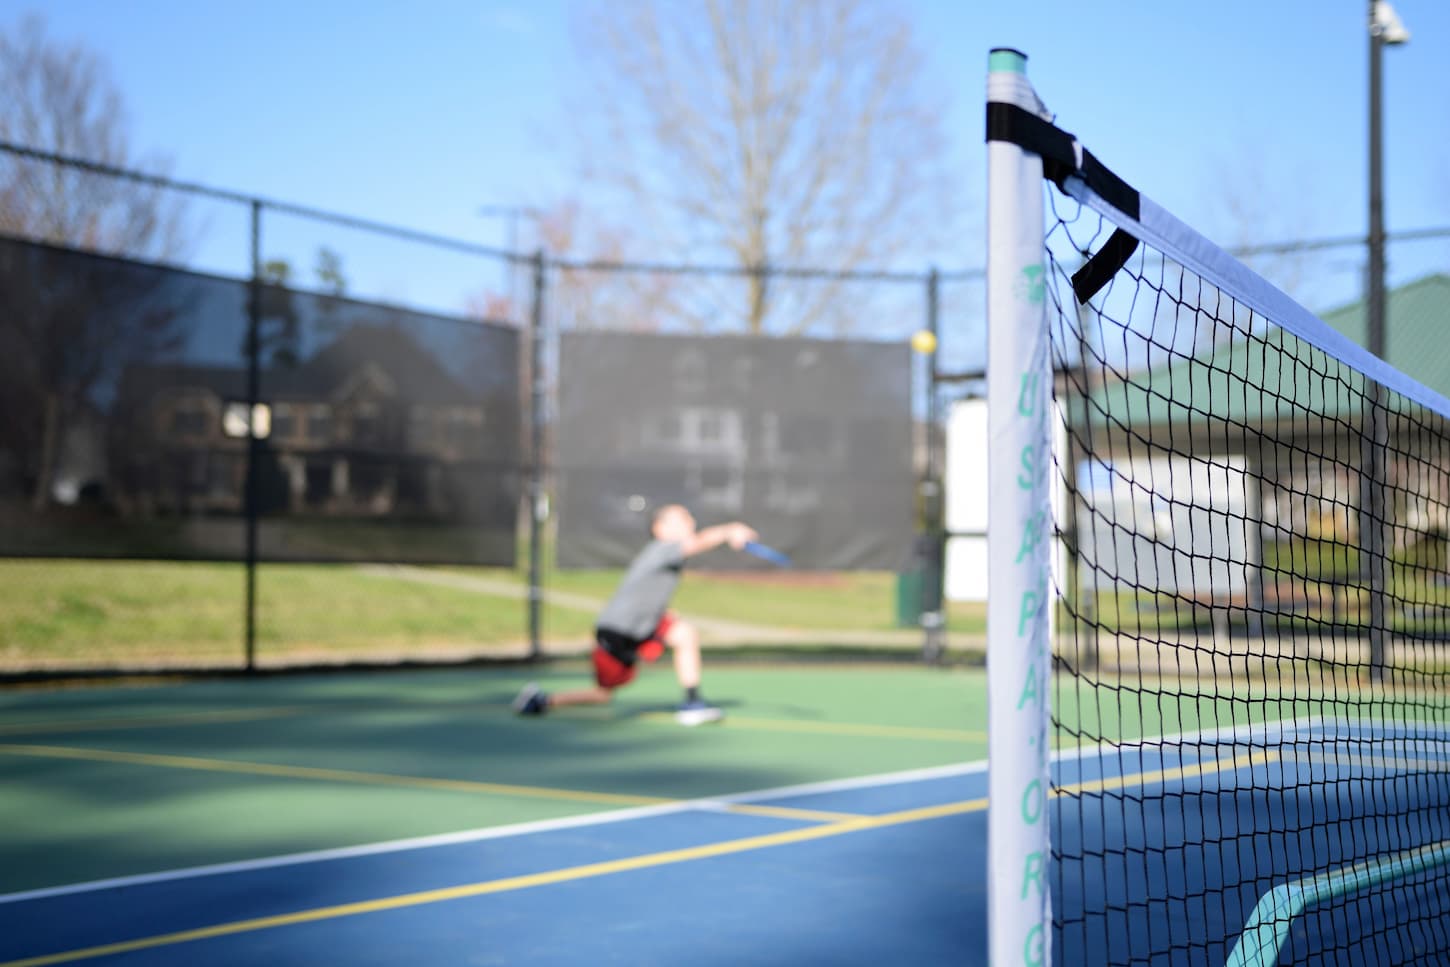 Does Pickleball Damage Tennis Courts? Misconceptions Debunked